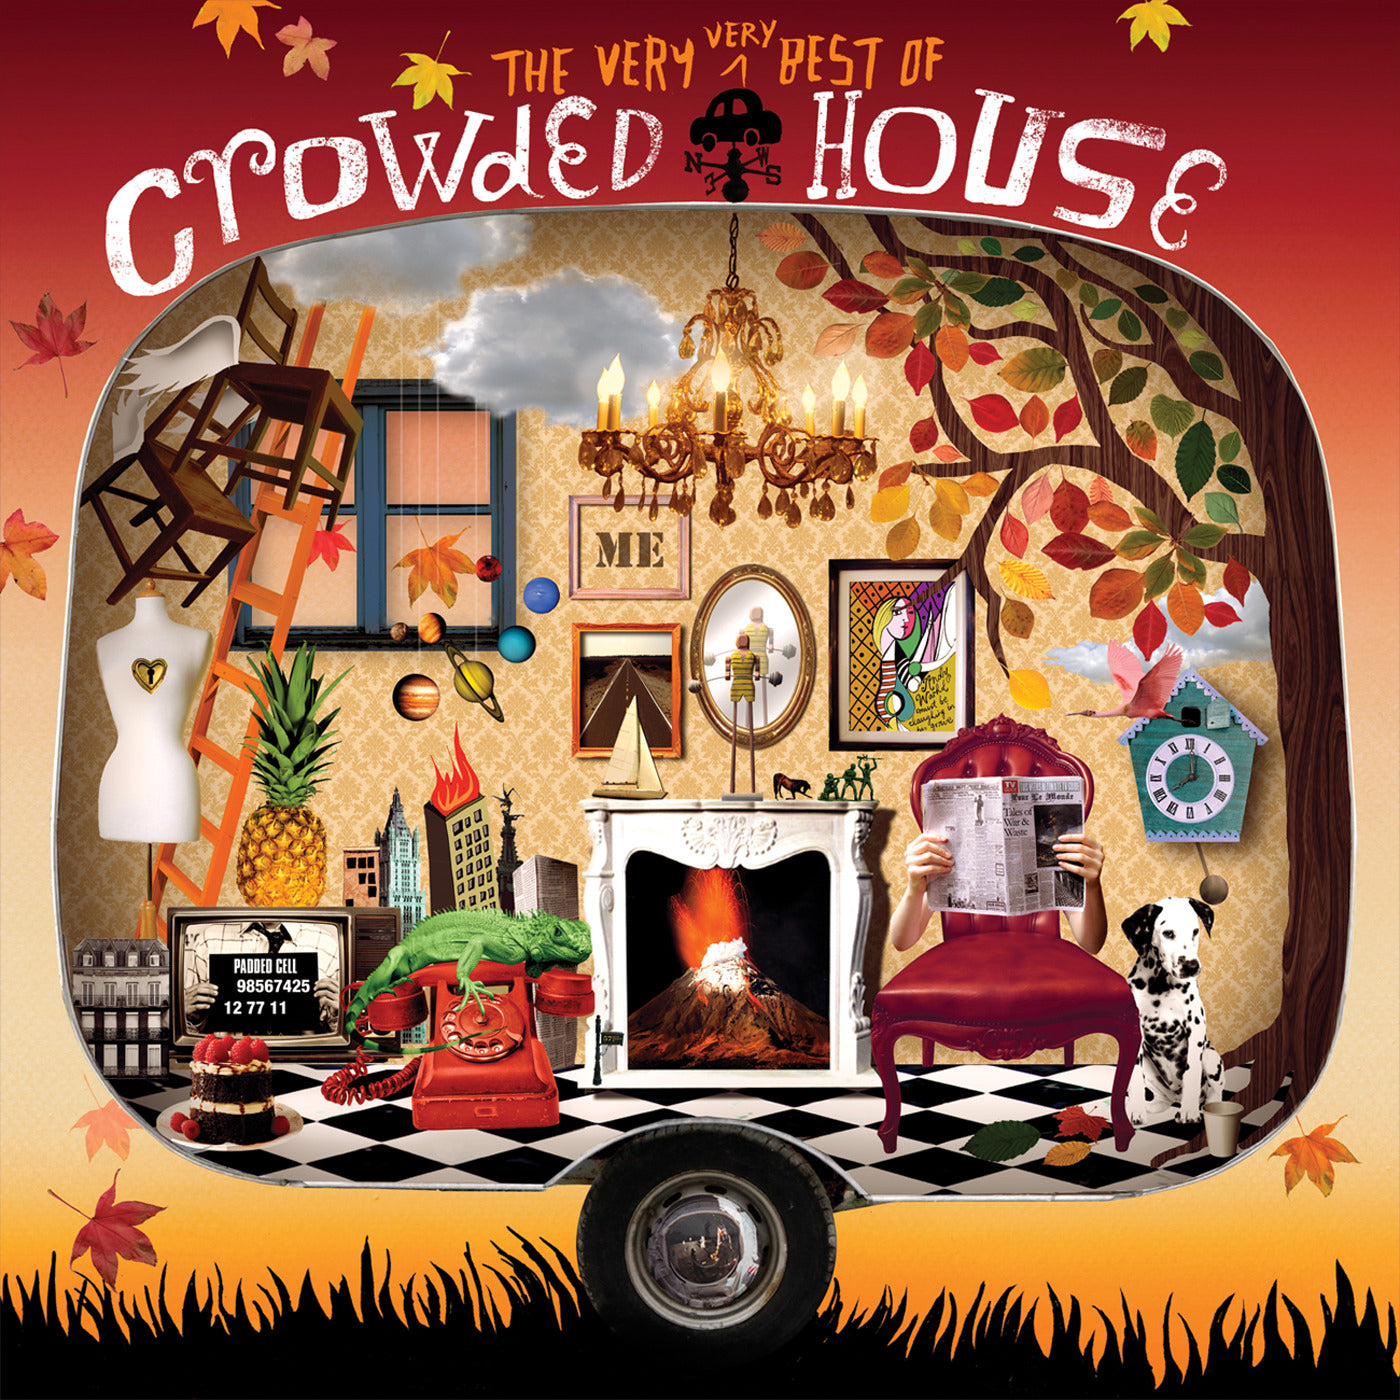 Crosley Record Storage Crate & Crowded House The Very Very Best Of Crowed House - Double Vinyl Album Bundle - SILBERSHELL